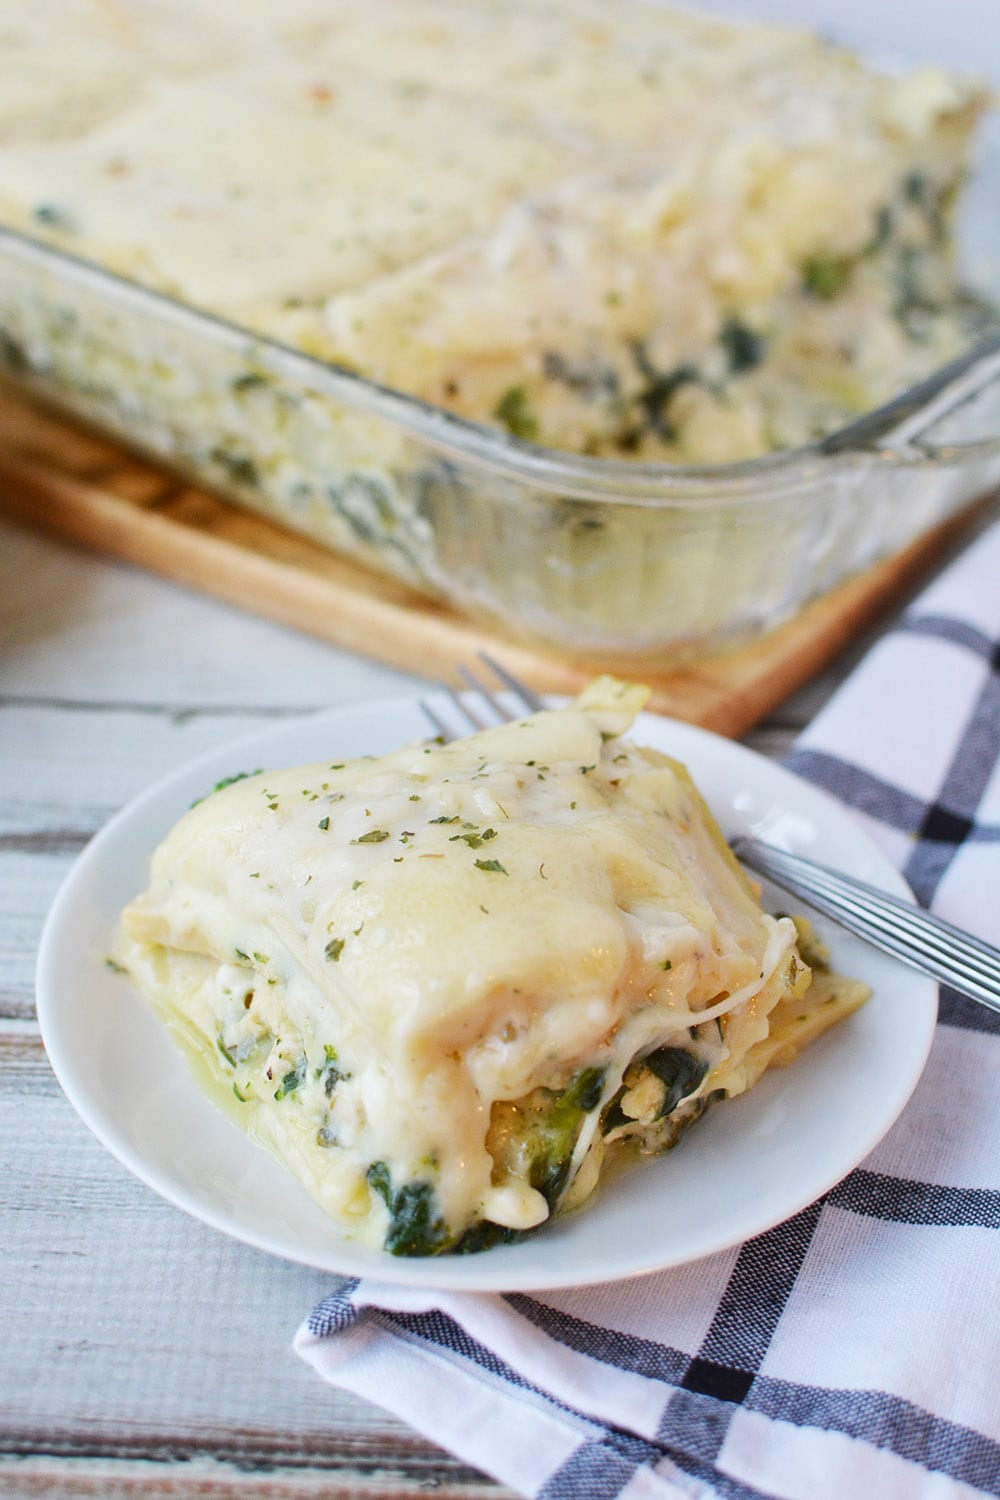 Chicken lasagna with spinach topped with cheese.